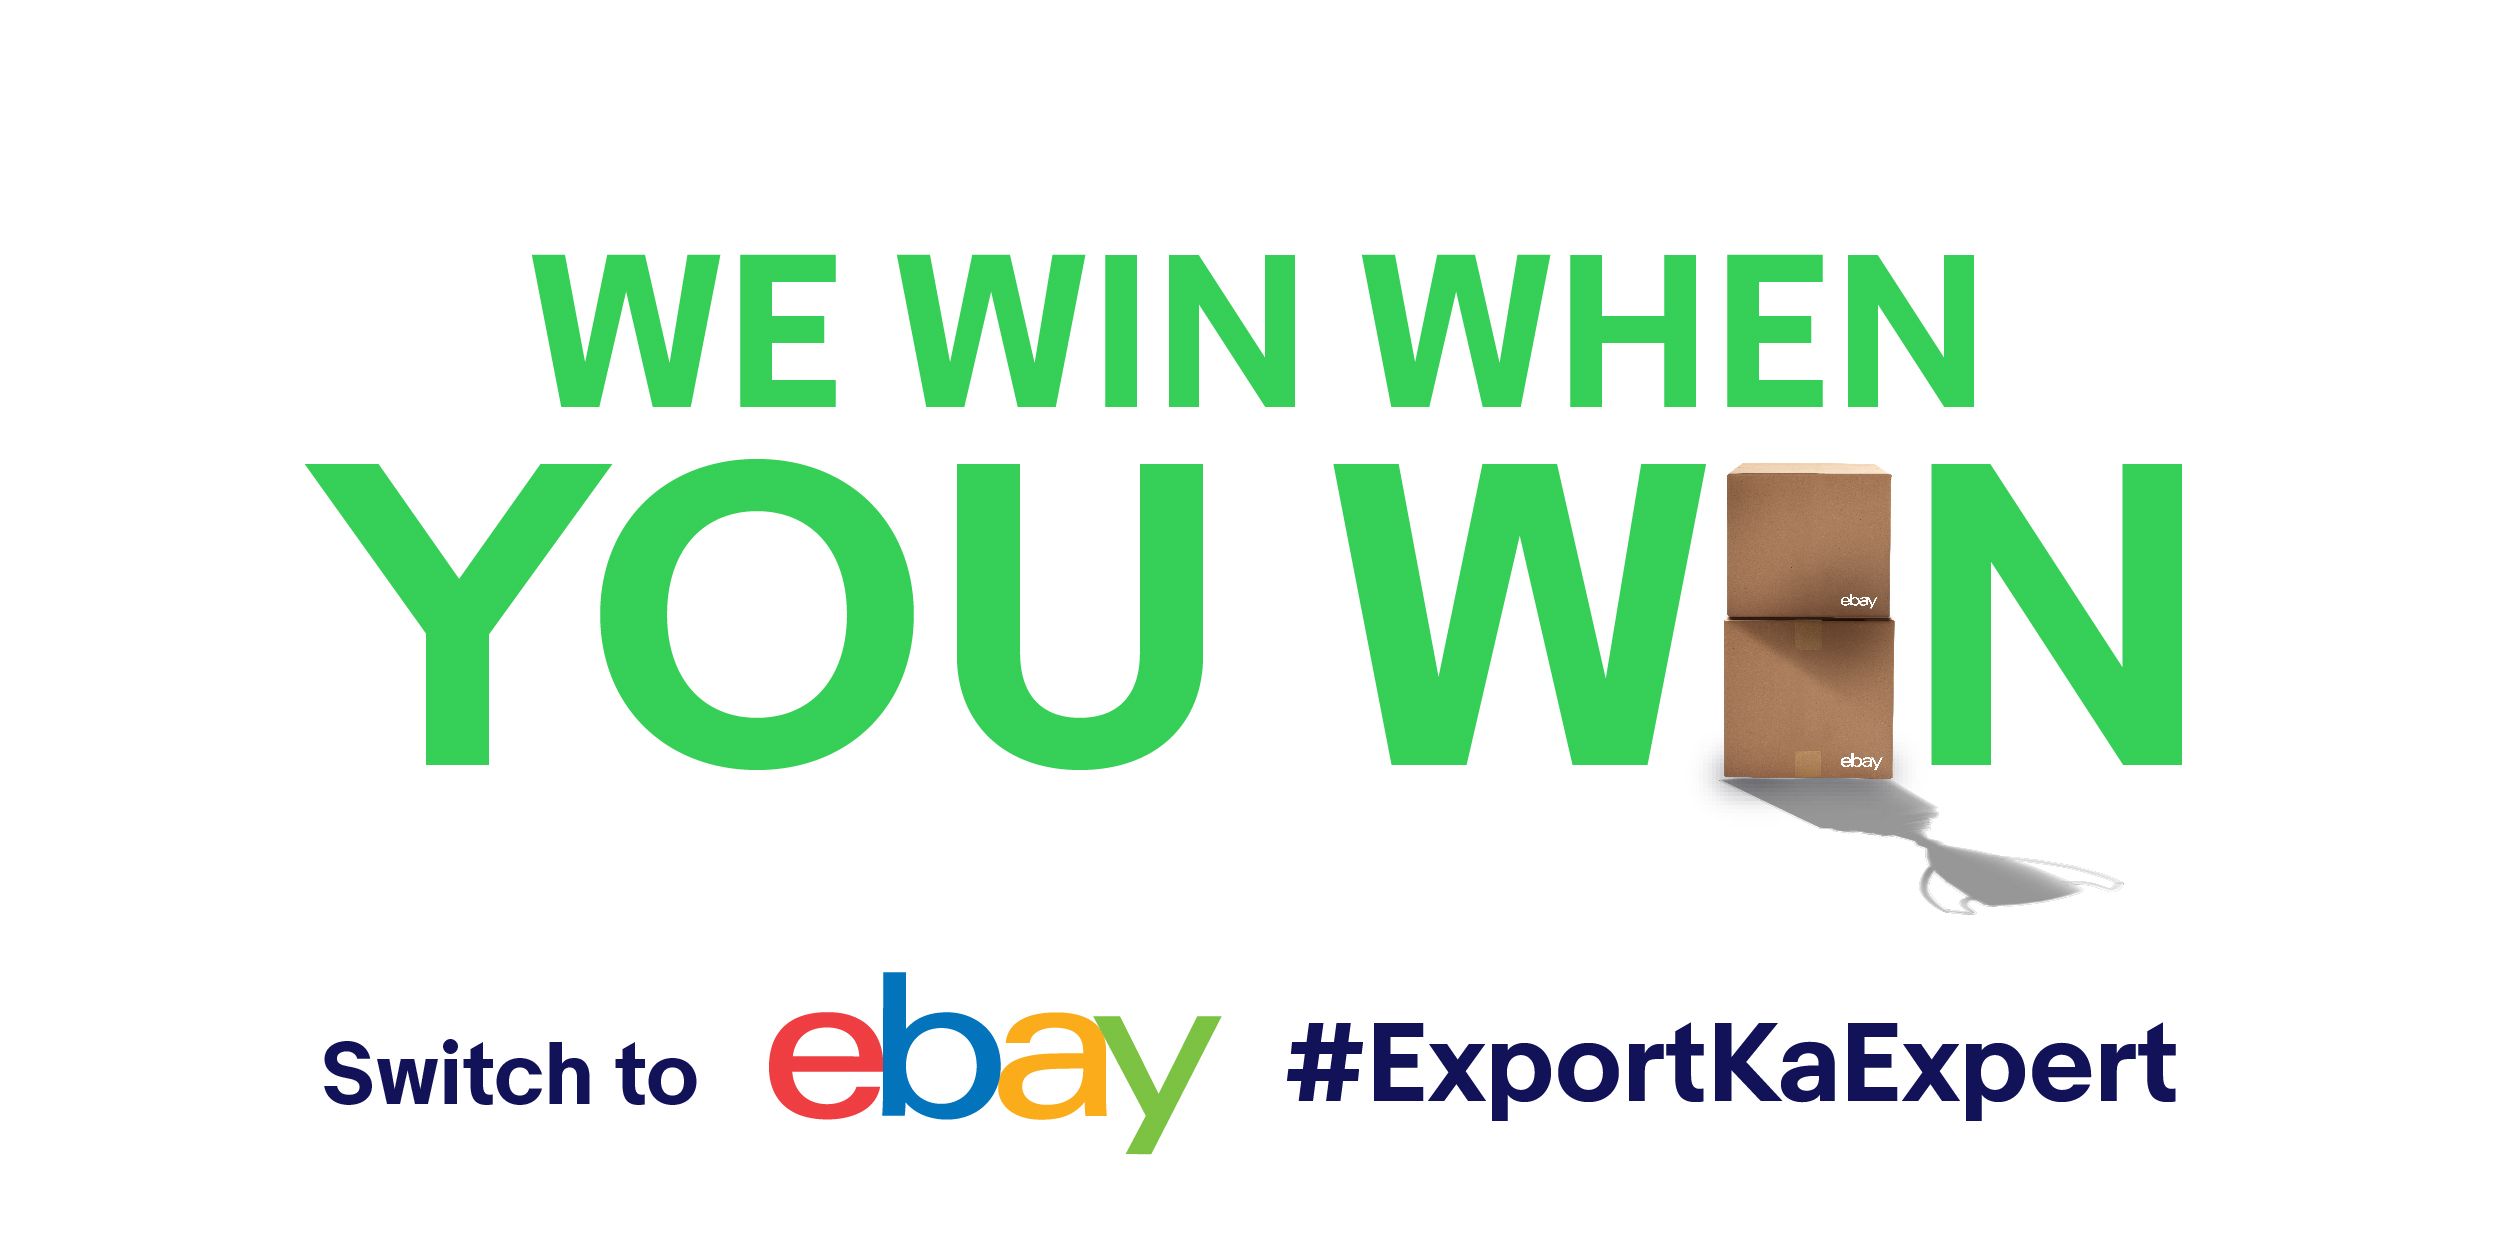 eBay reveals why it is the  'Export Ka Expert' in new campaign 

